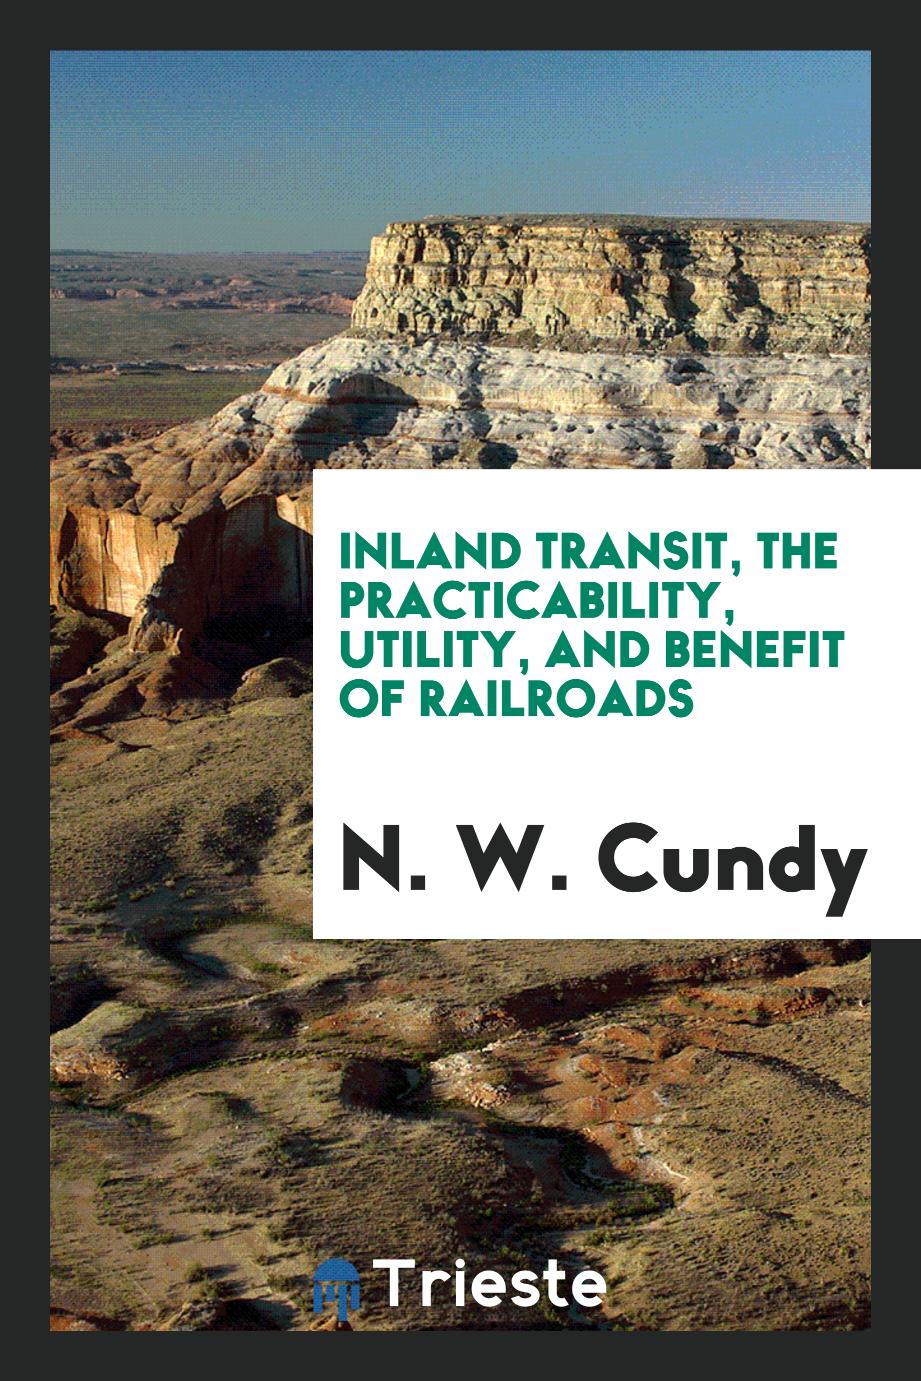 Inland Transit, the Practicability, Utility, and Benefit of Railroads